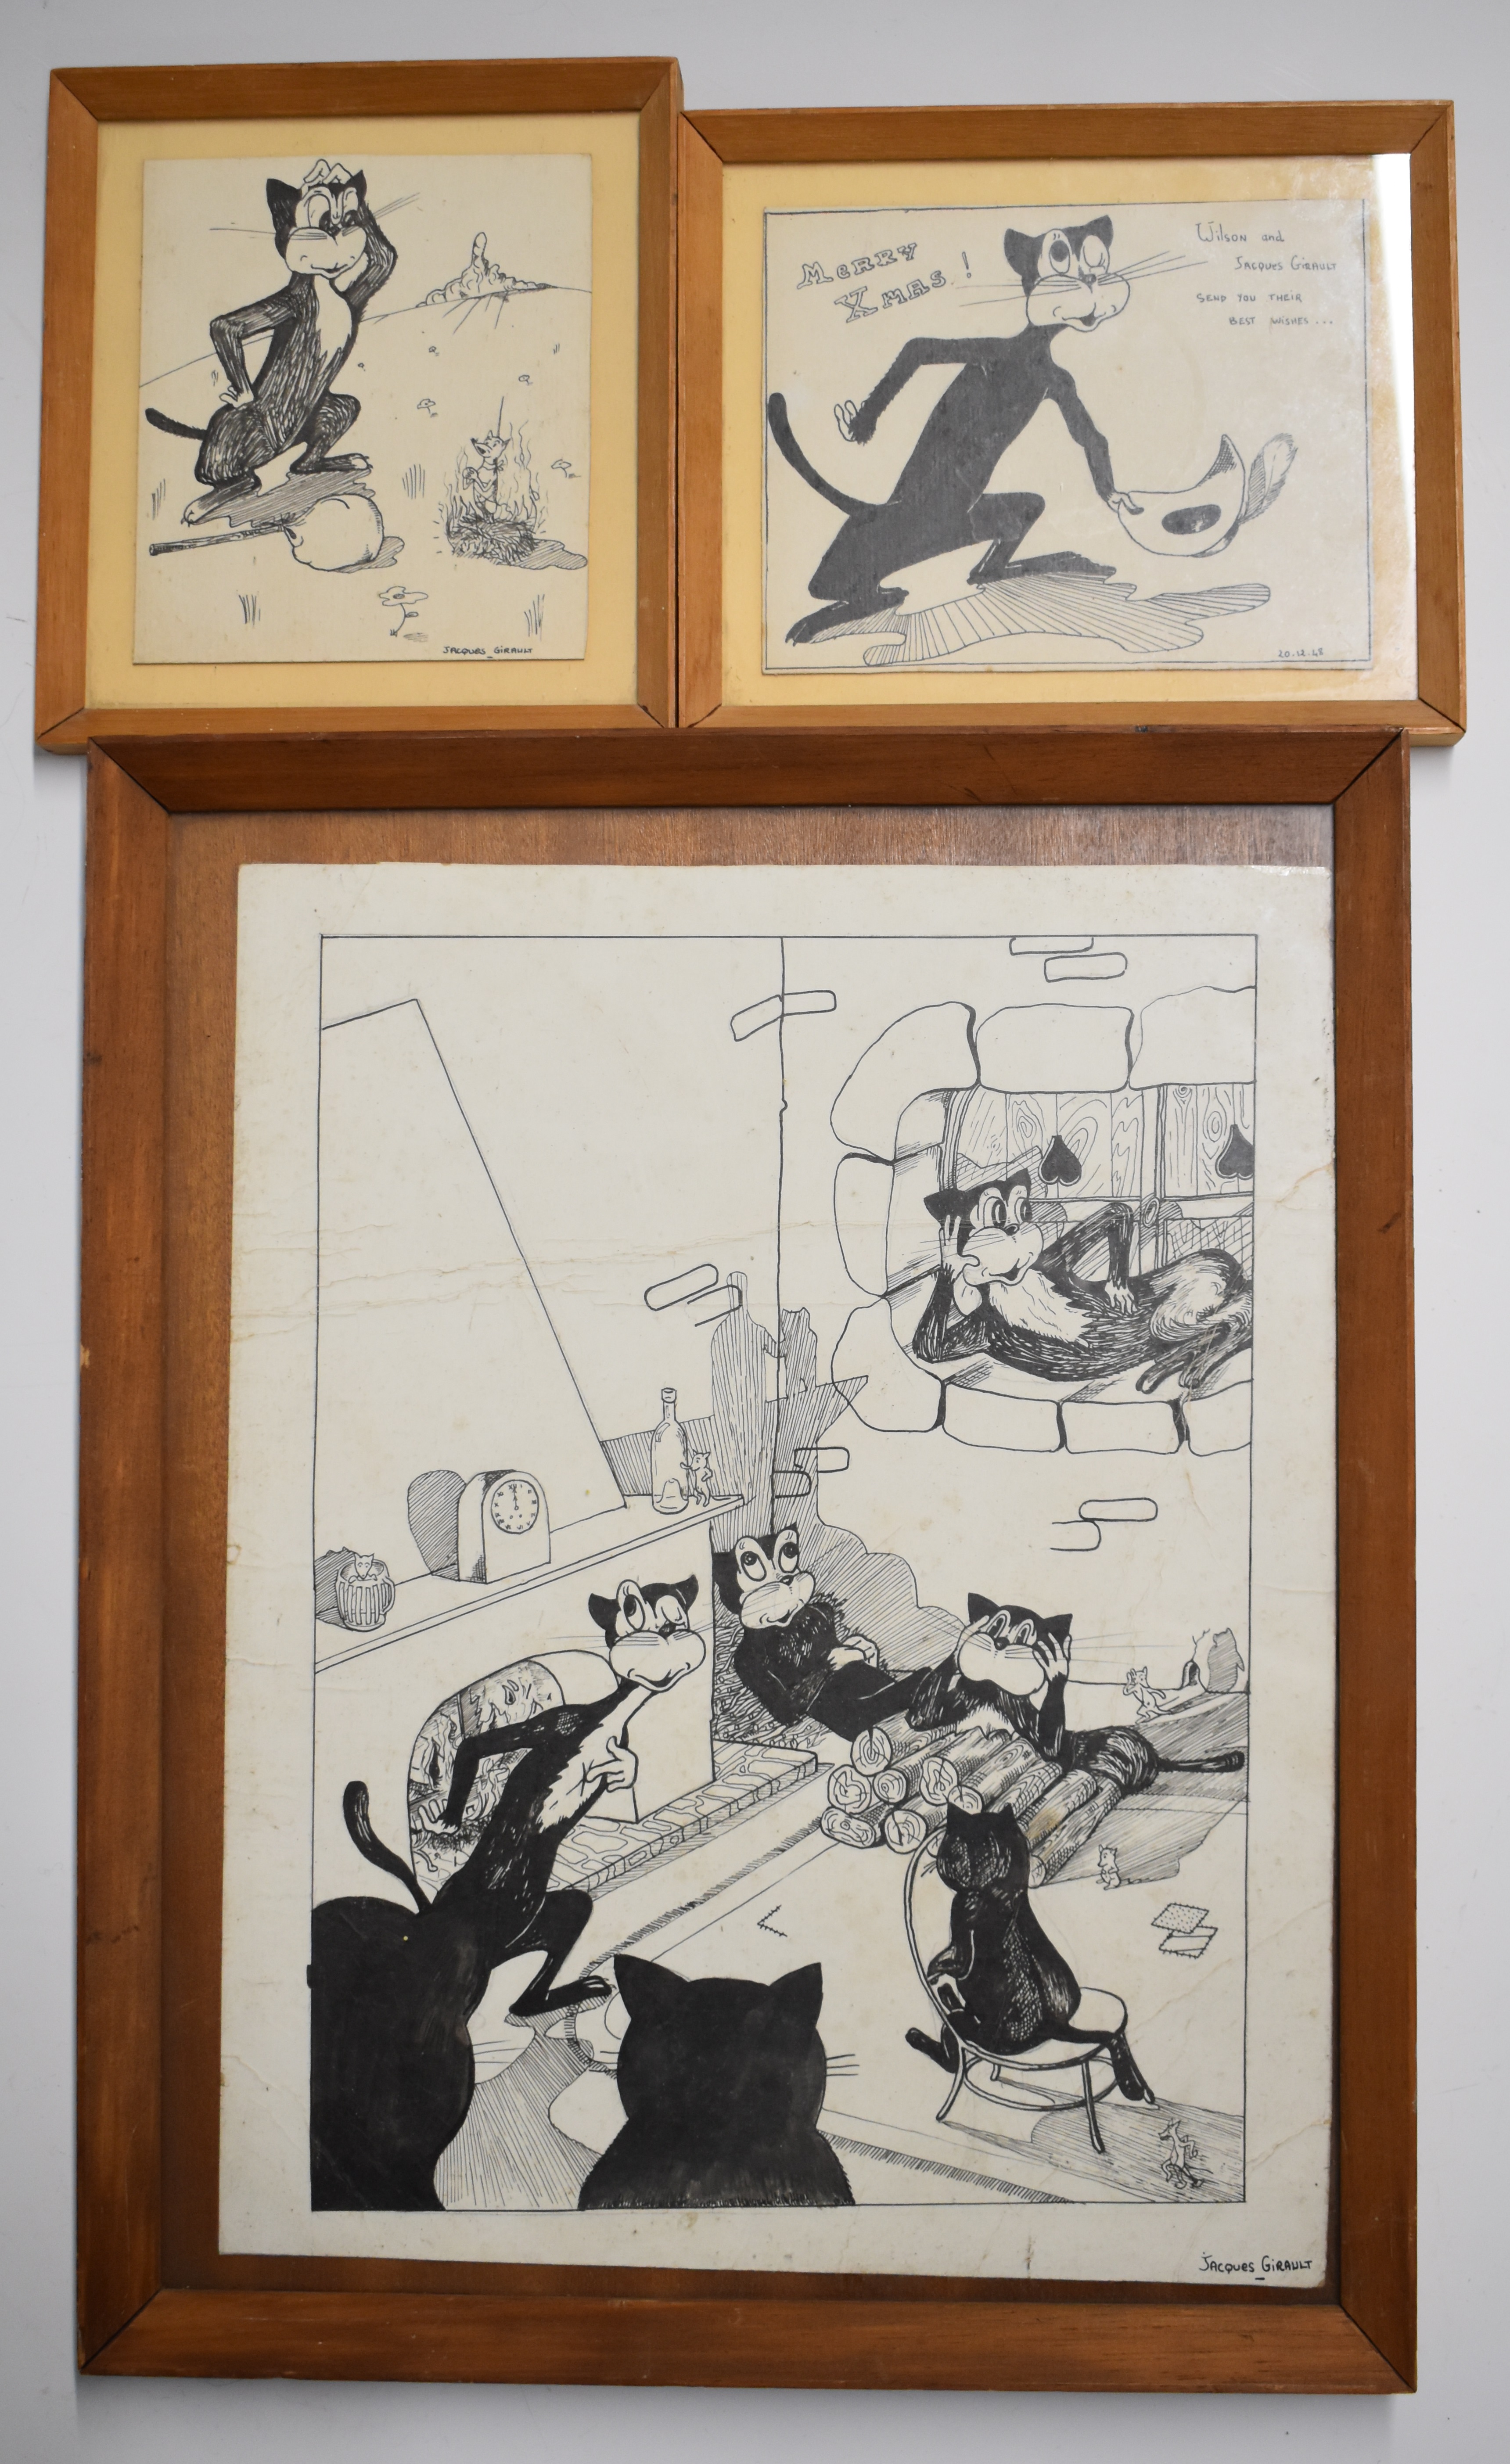 Jacques Girault three pen and ink novelty cat drawings or cartoons, two signed lower right the other